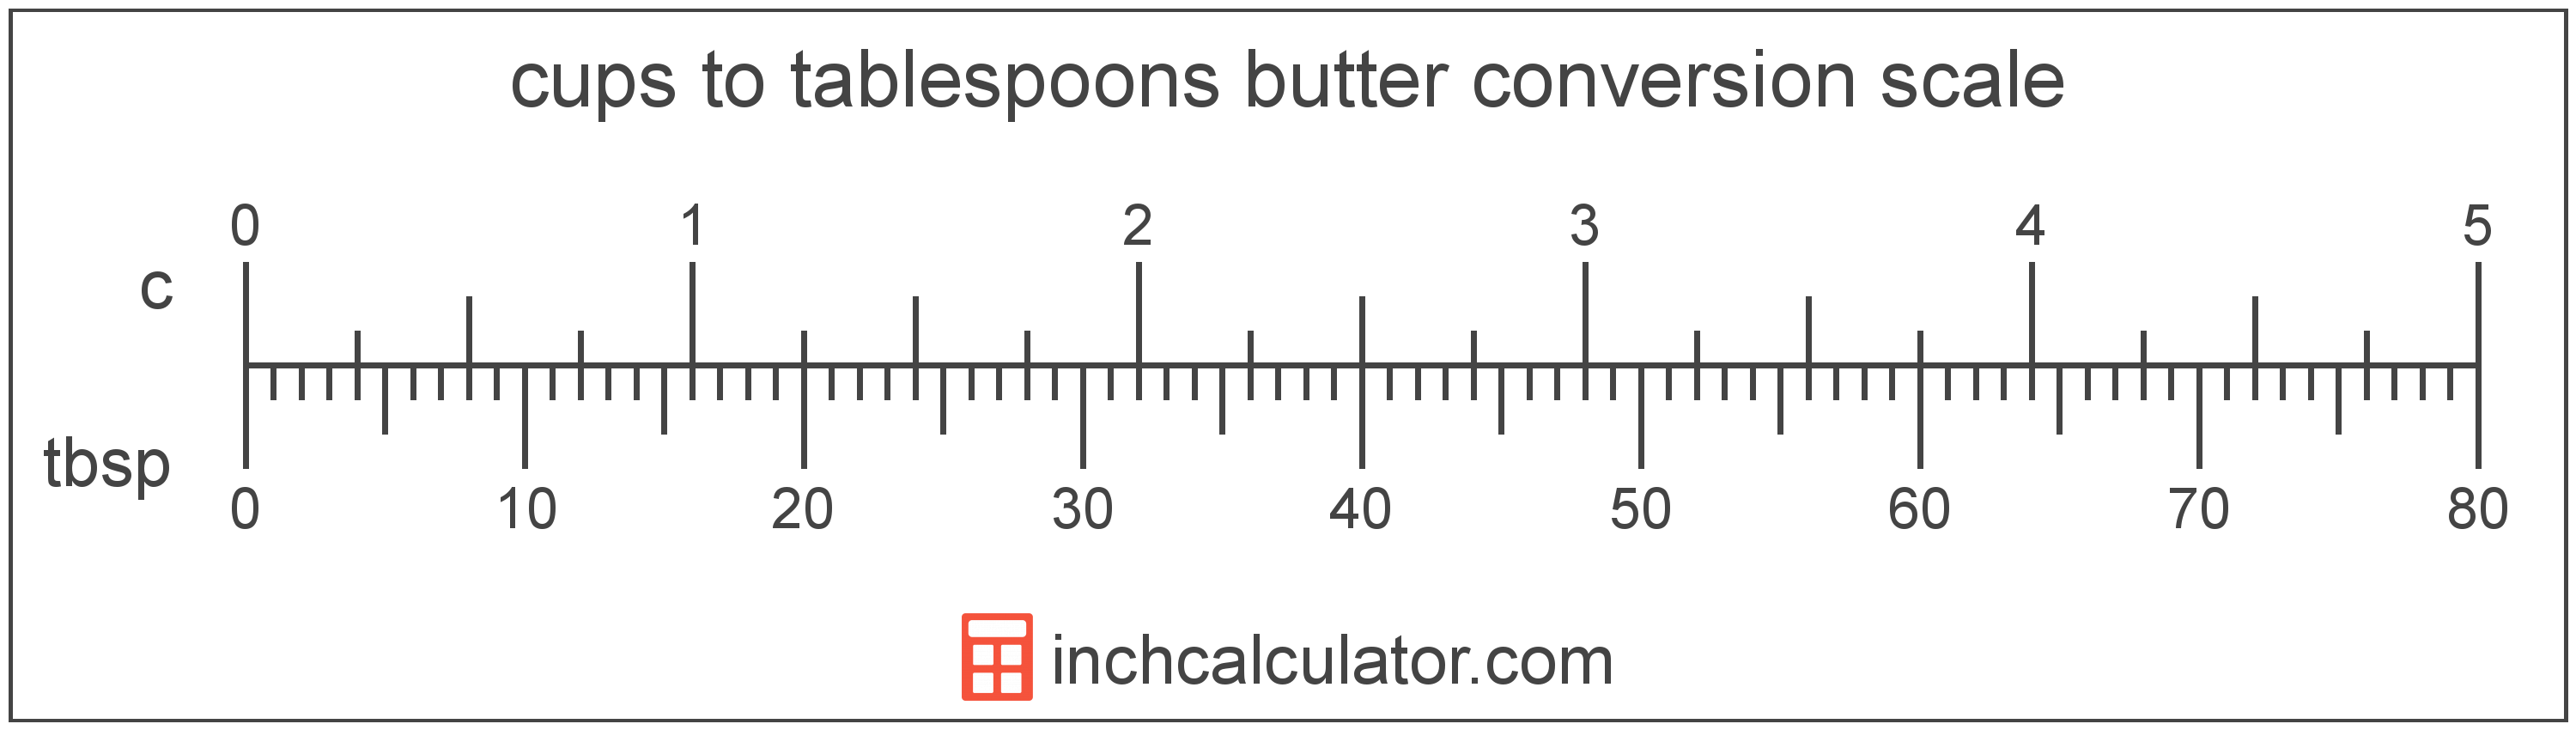 conversion scale showing tablespoons and equivalent cups butter values